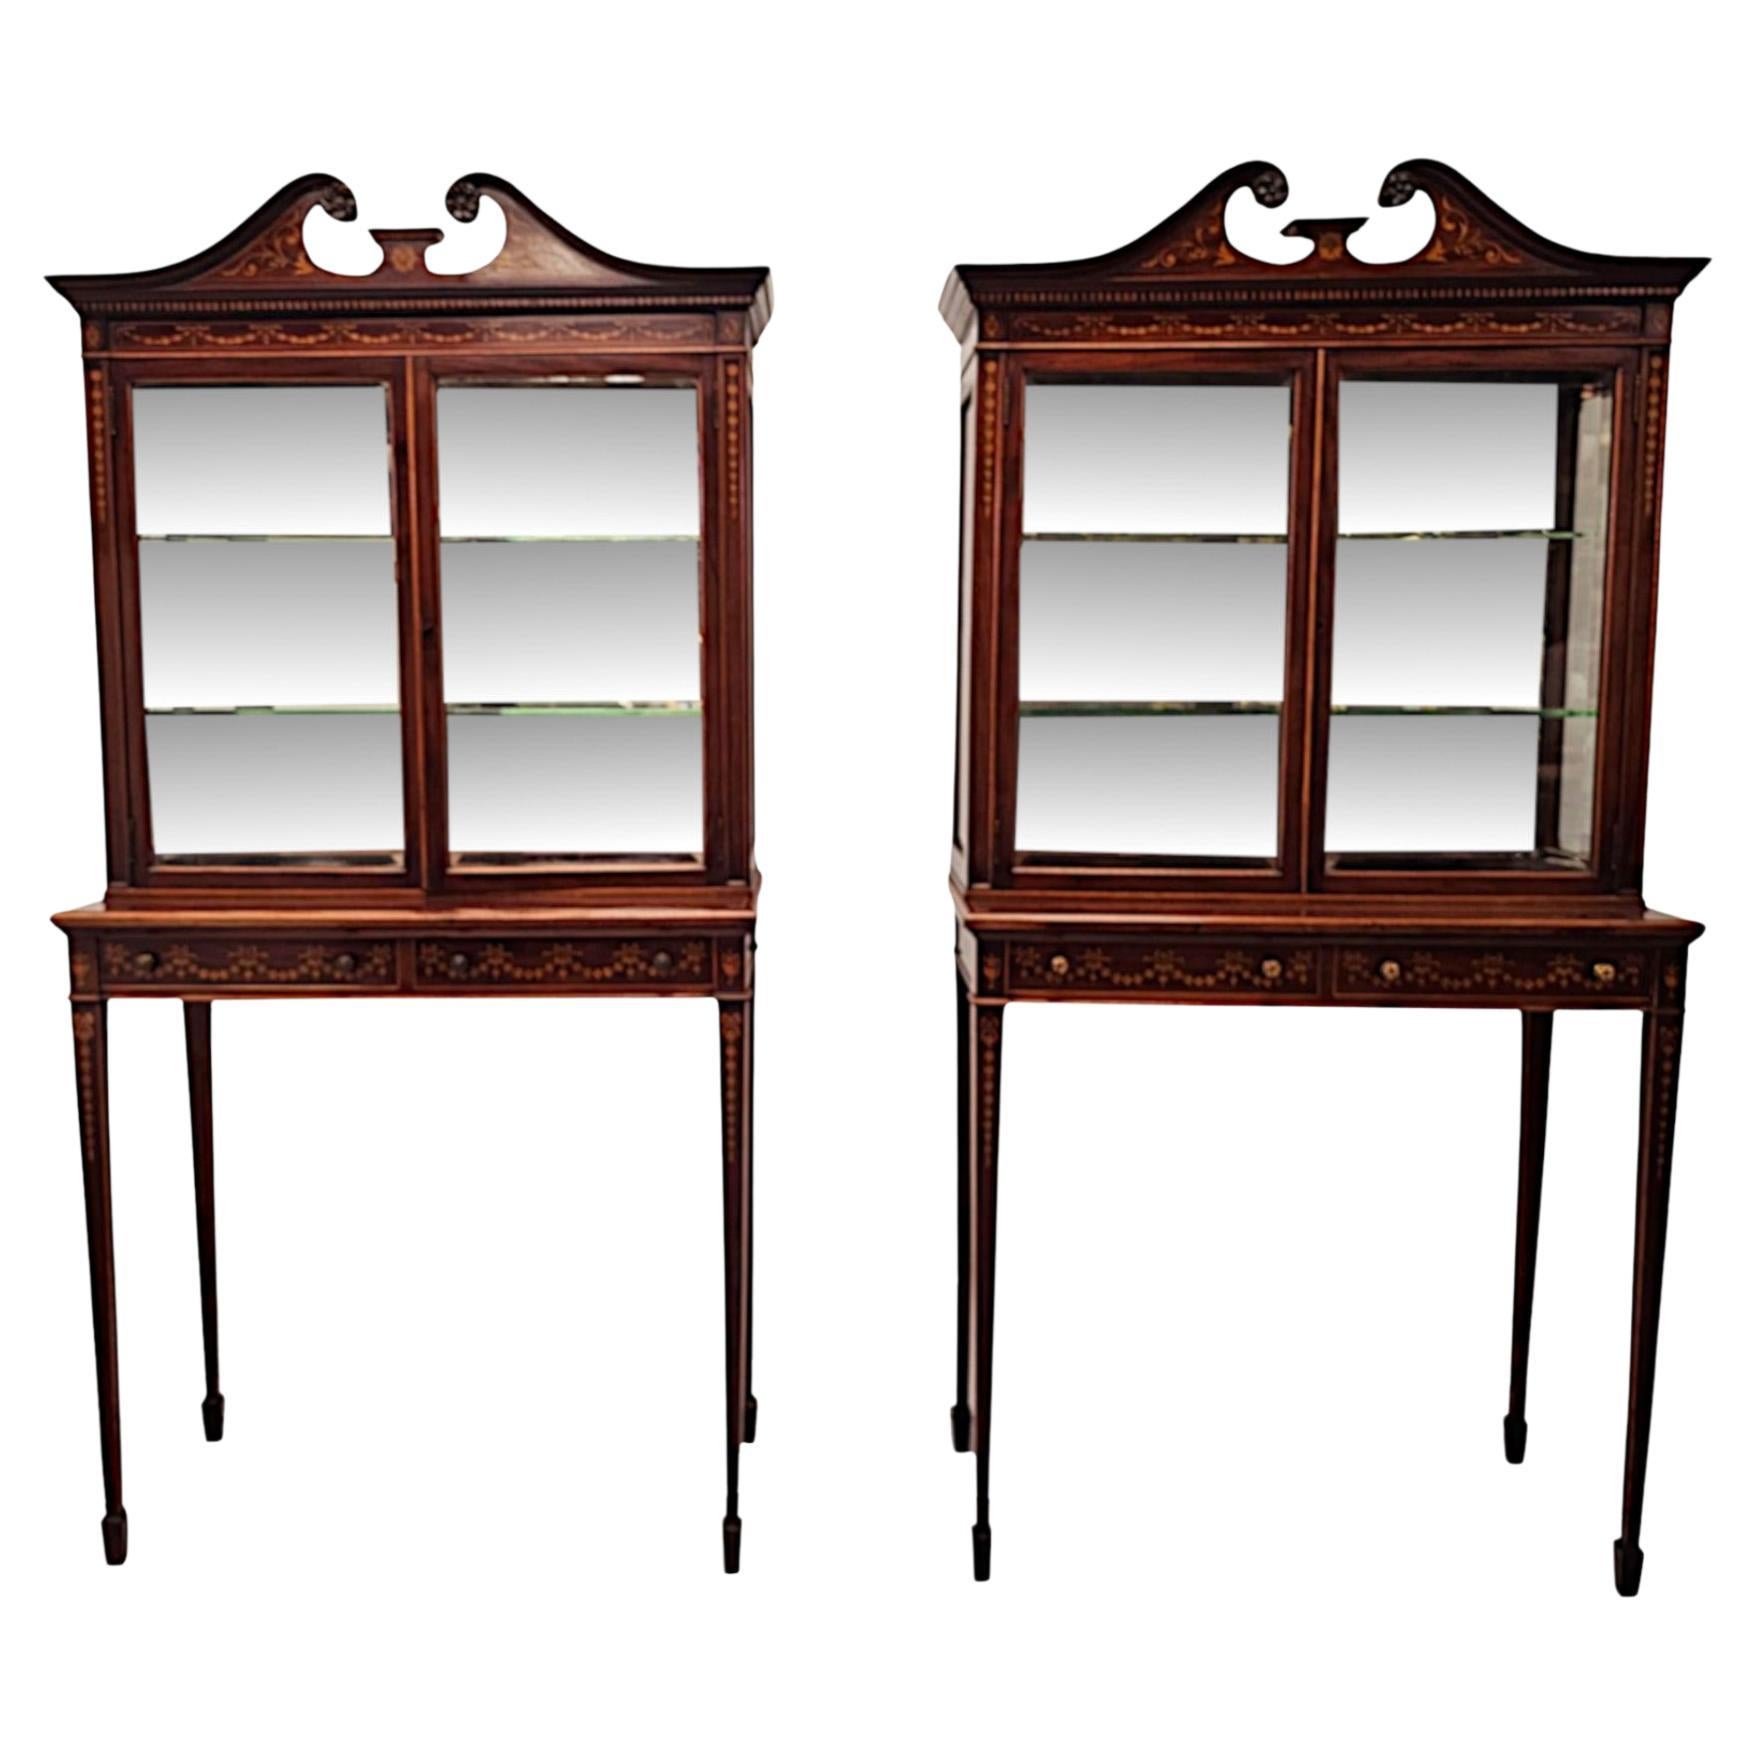 A Rare Pair of Edwardian Pier Cabinets or Bookcases after Edward and Roberts